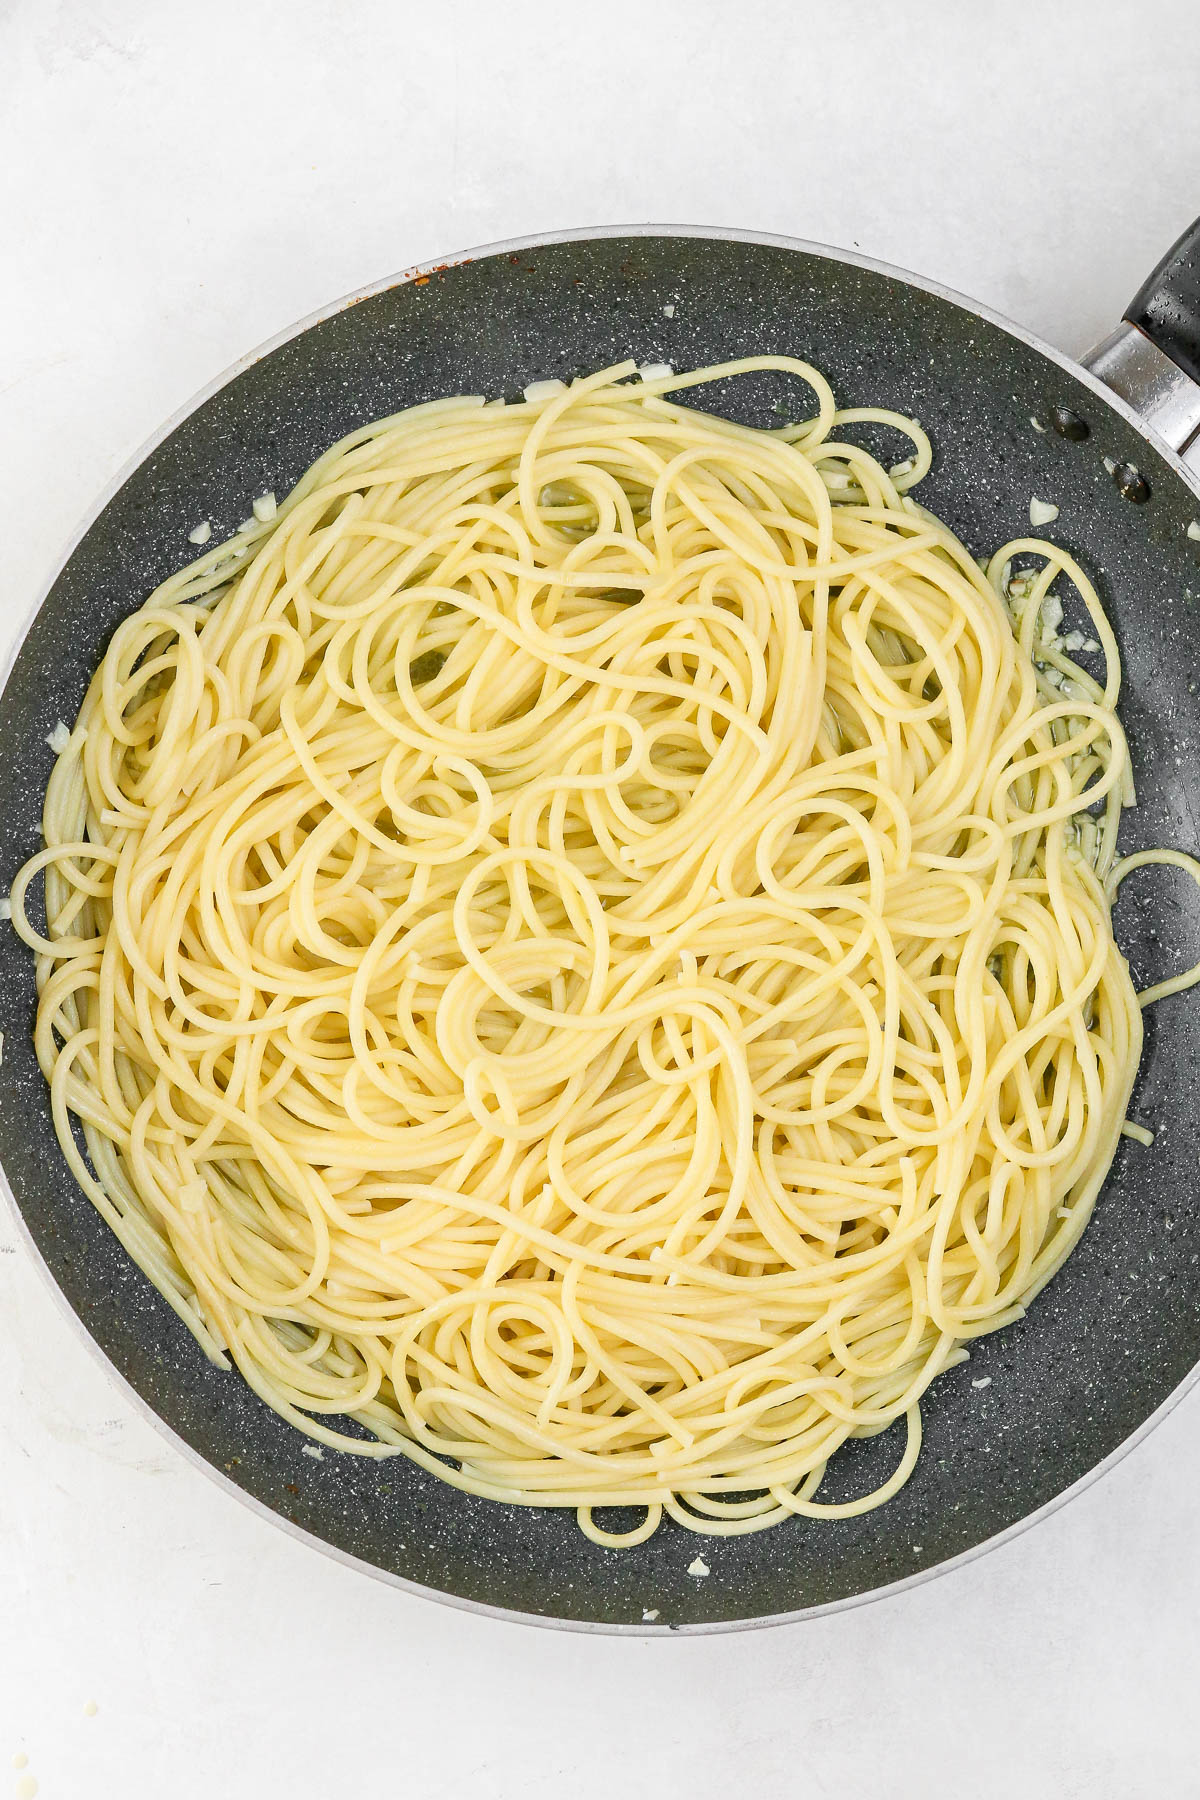 spaghetti in a pan tossed with garlic and oil.